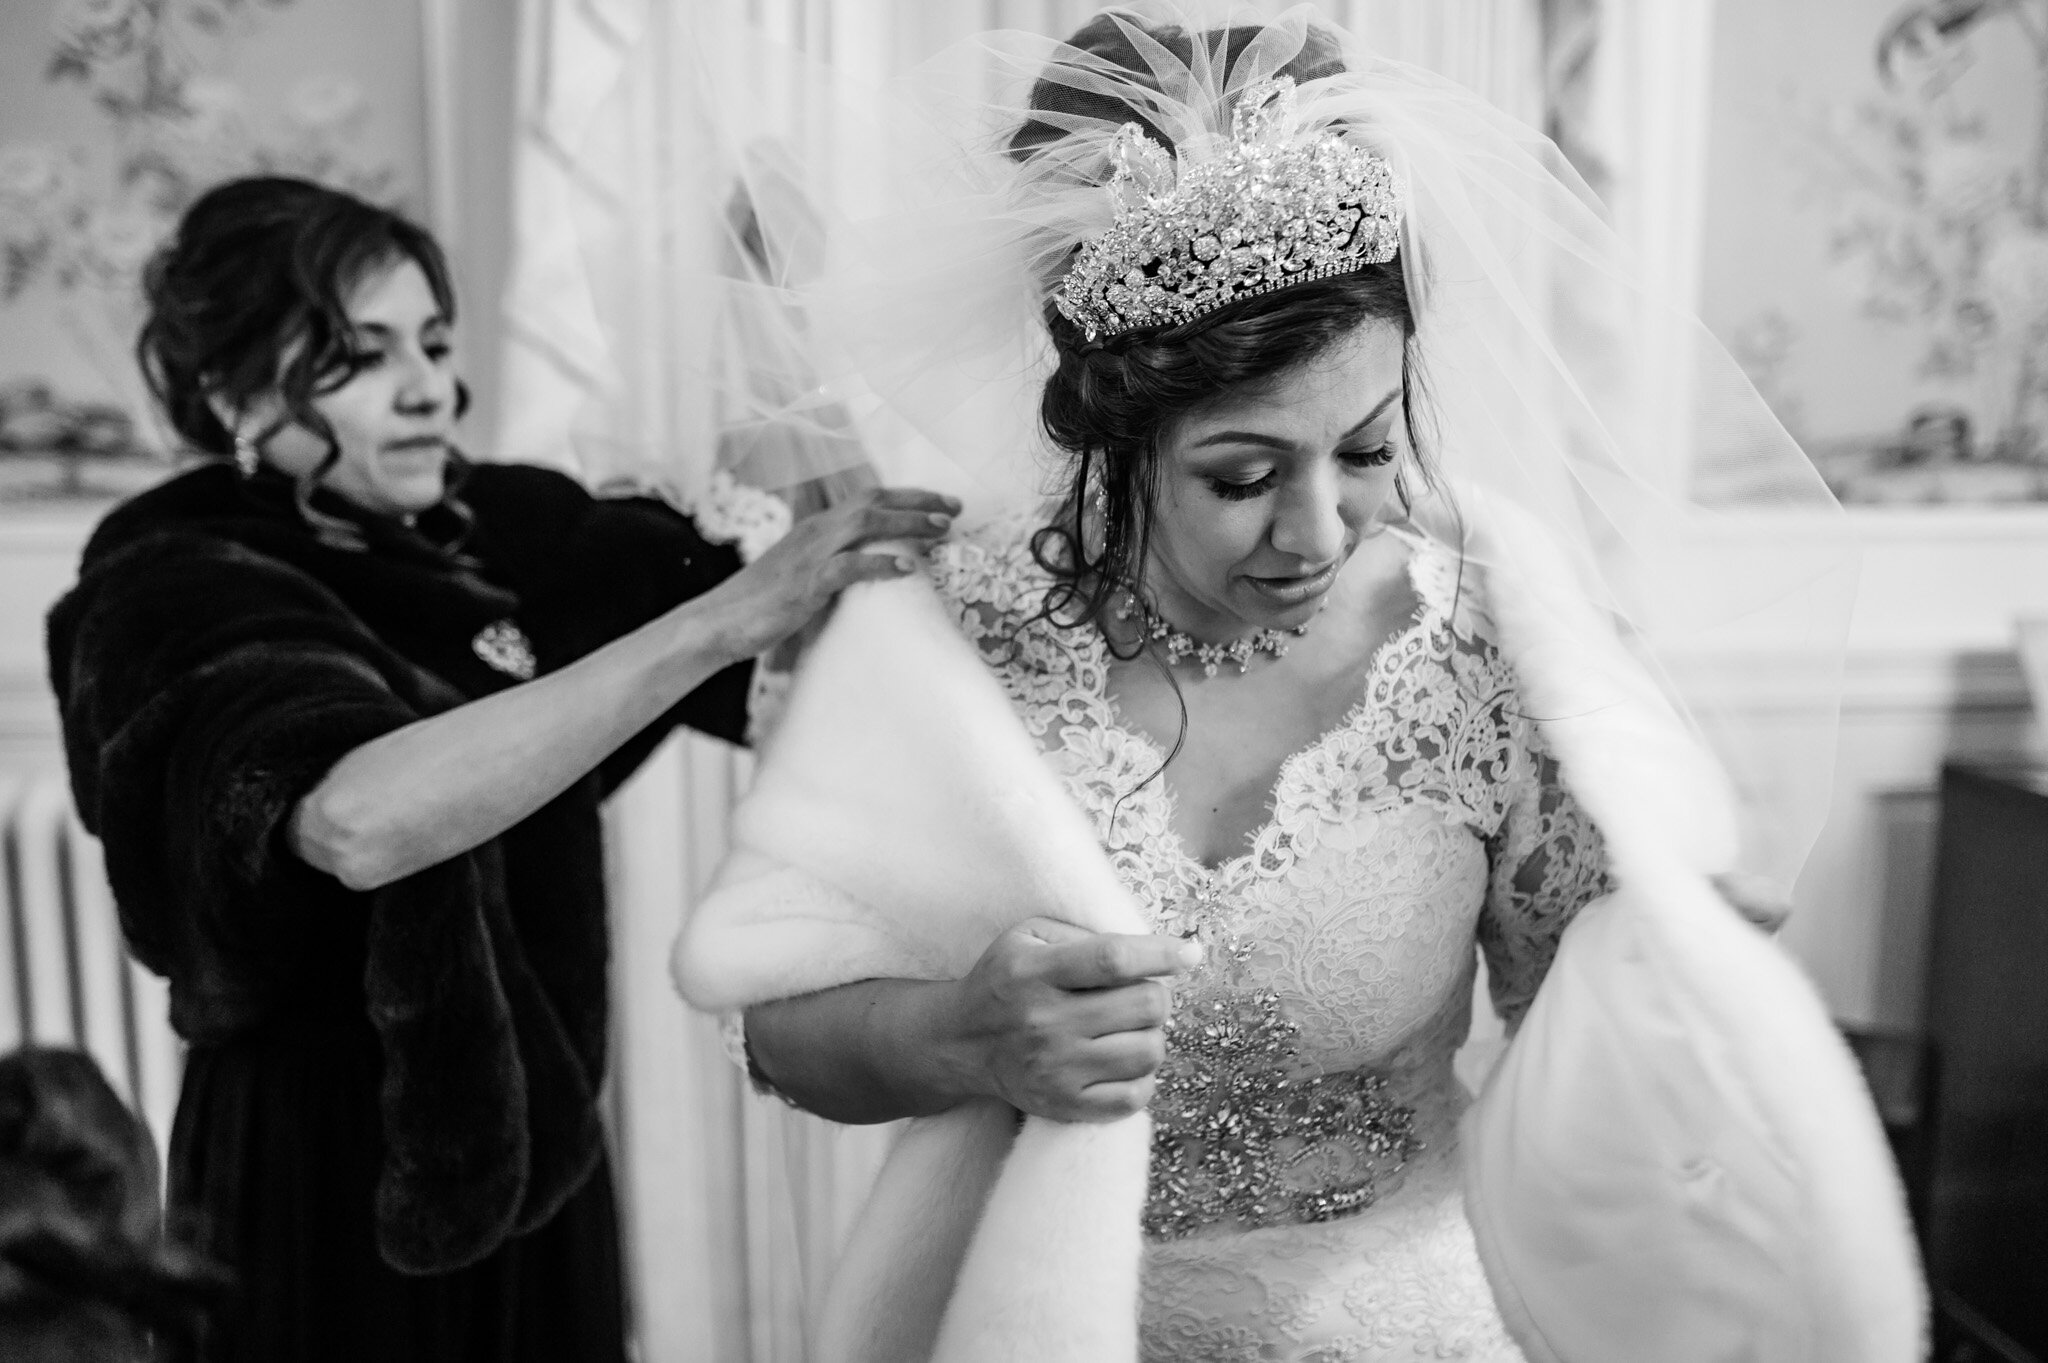 Latino bride getting ready on her wedding day